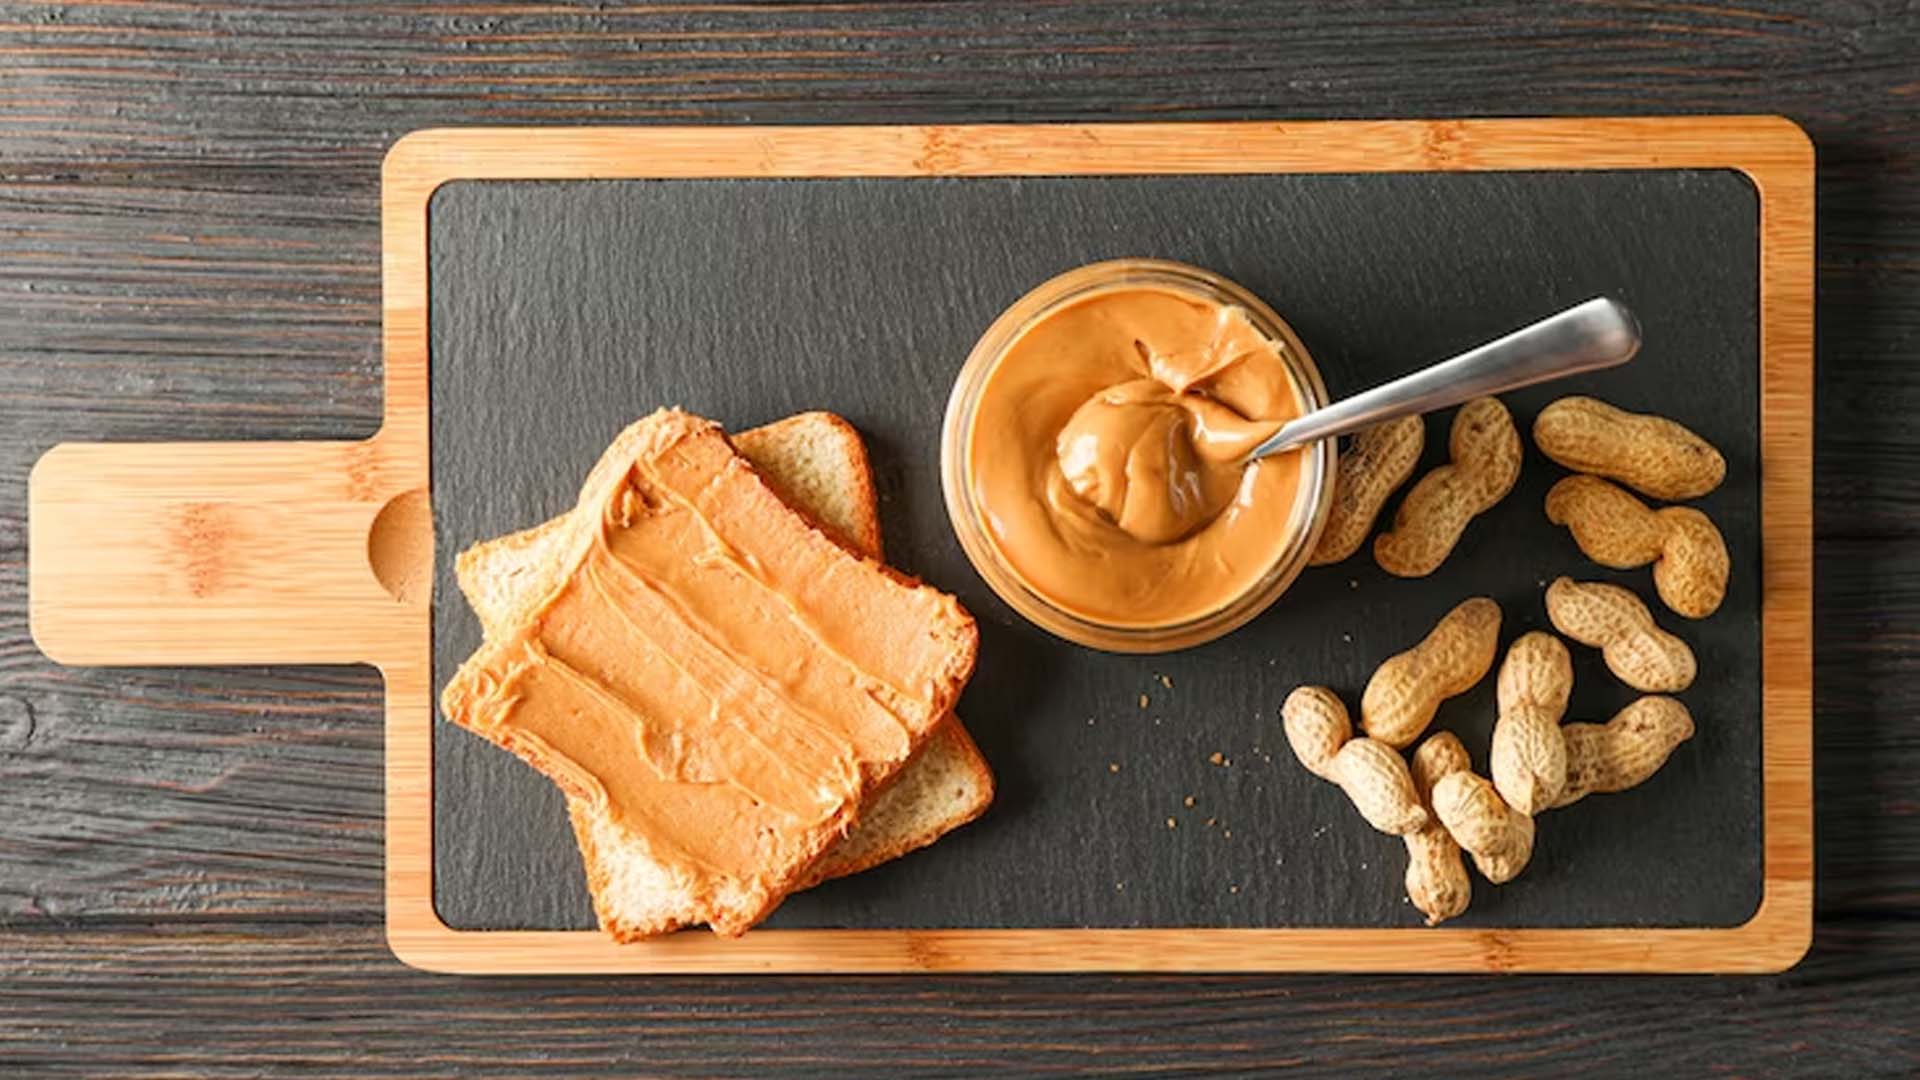 What are the Nutrition Facts of Peanut Butter Per 100g?